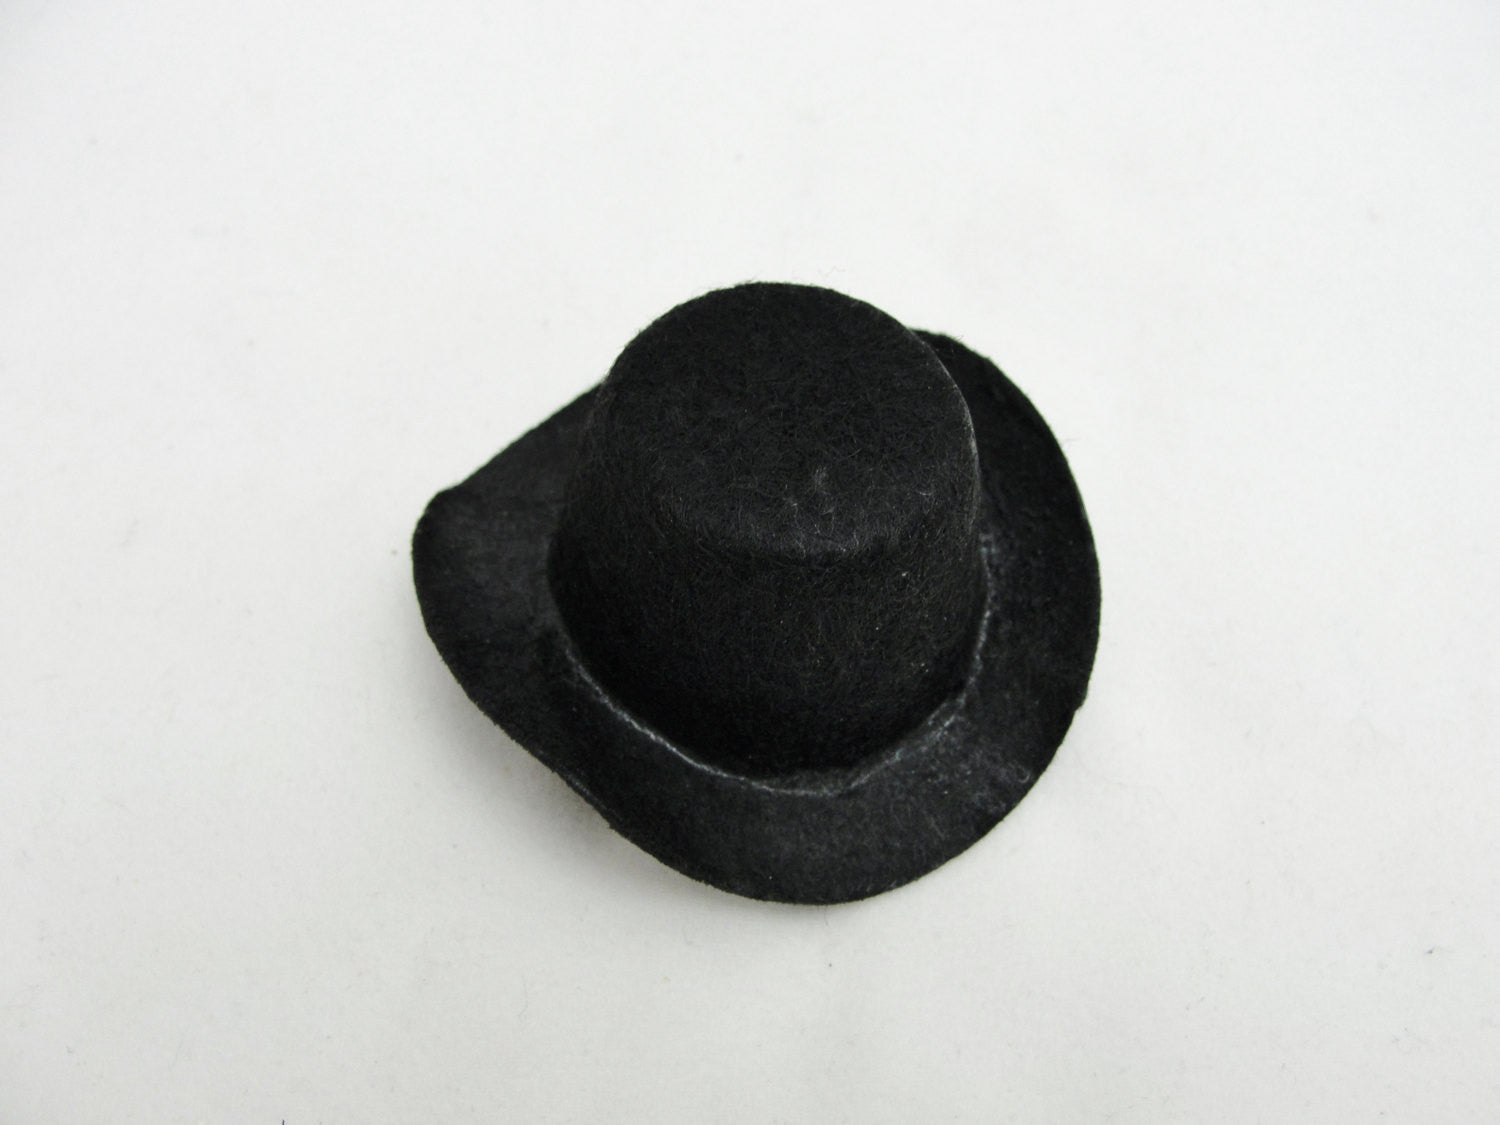 Miniature black cowboy or top hat fits a large peg person - General Crafts - Craft Supply House